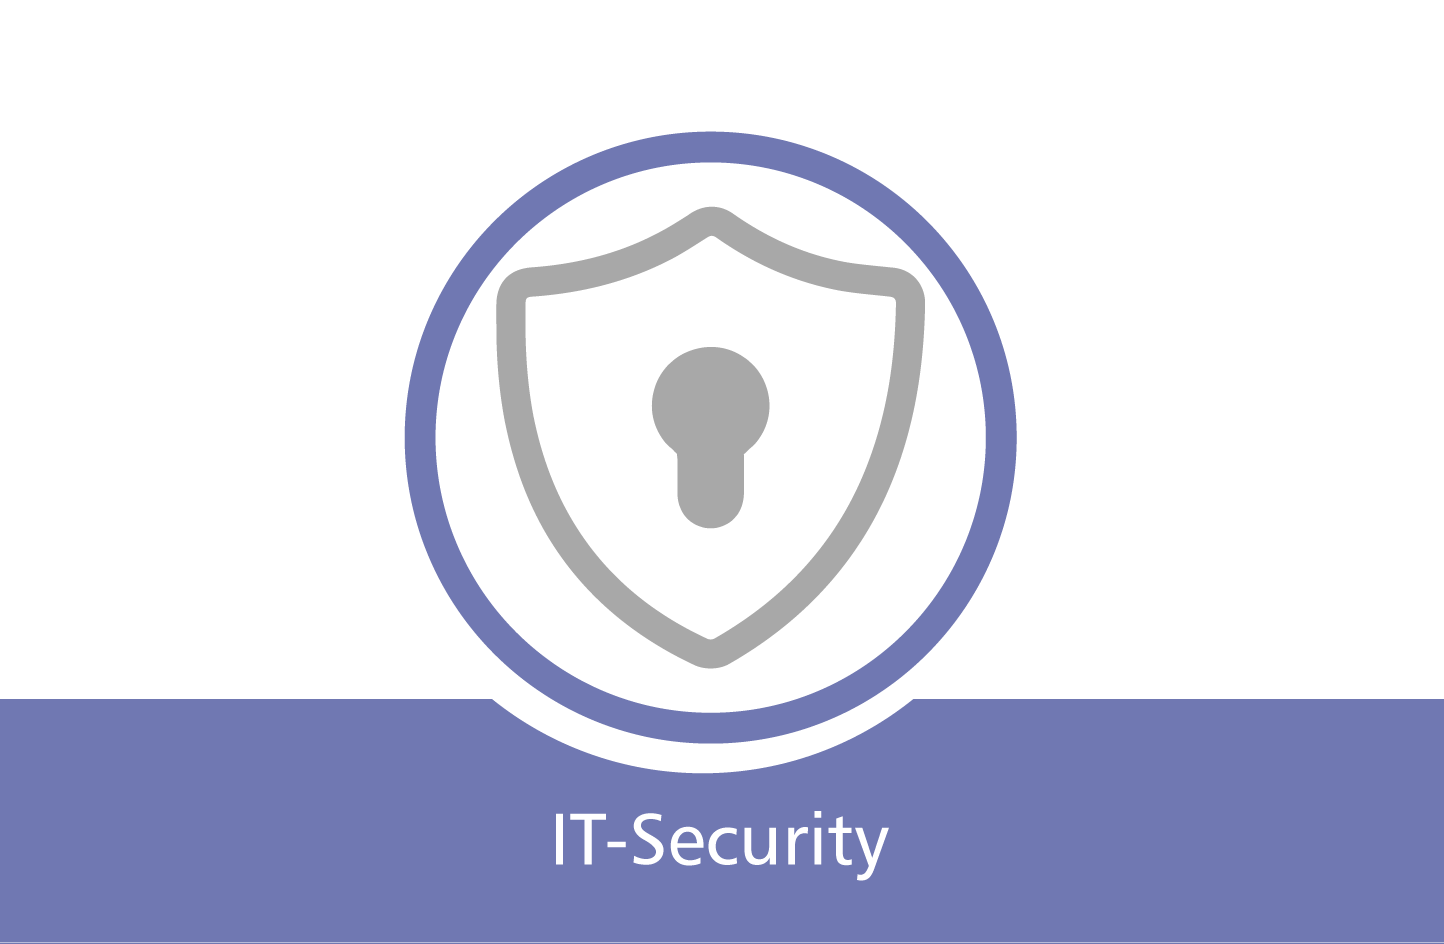 ITSecurity